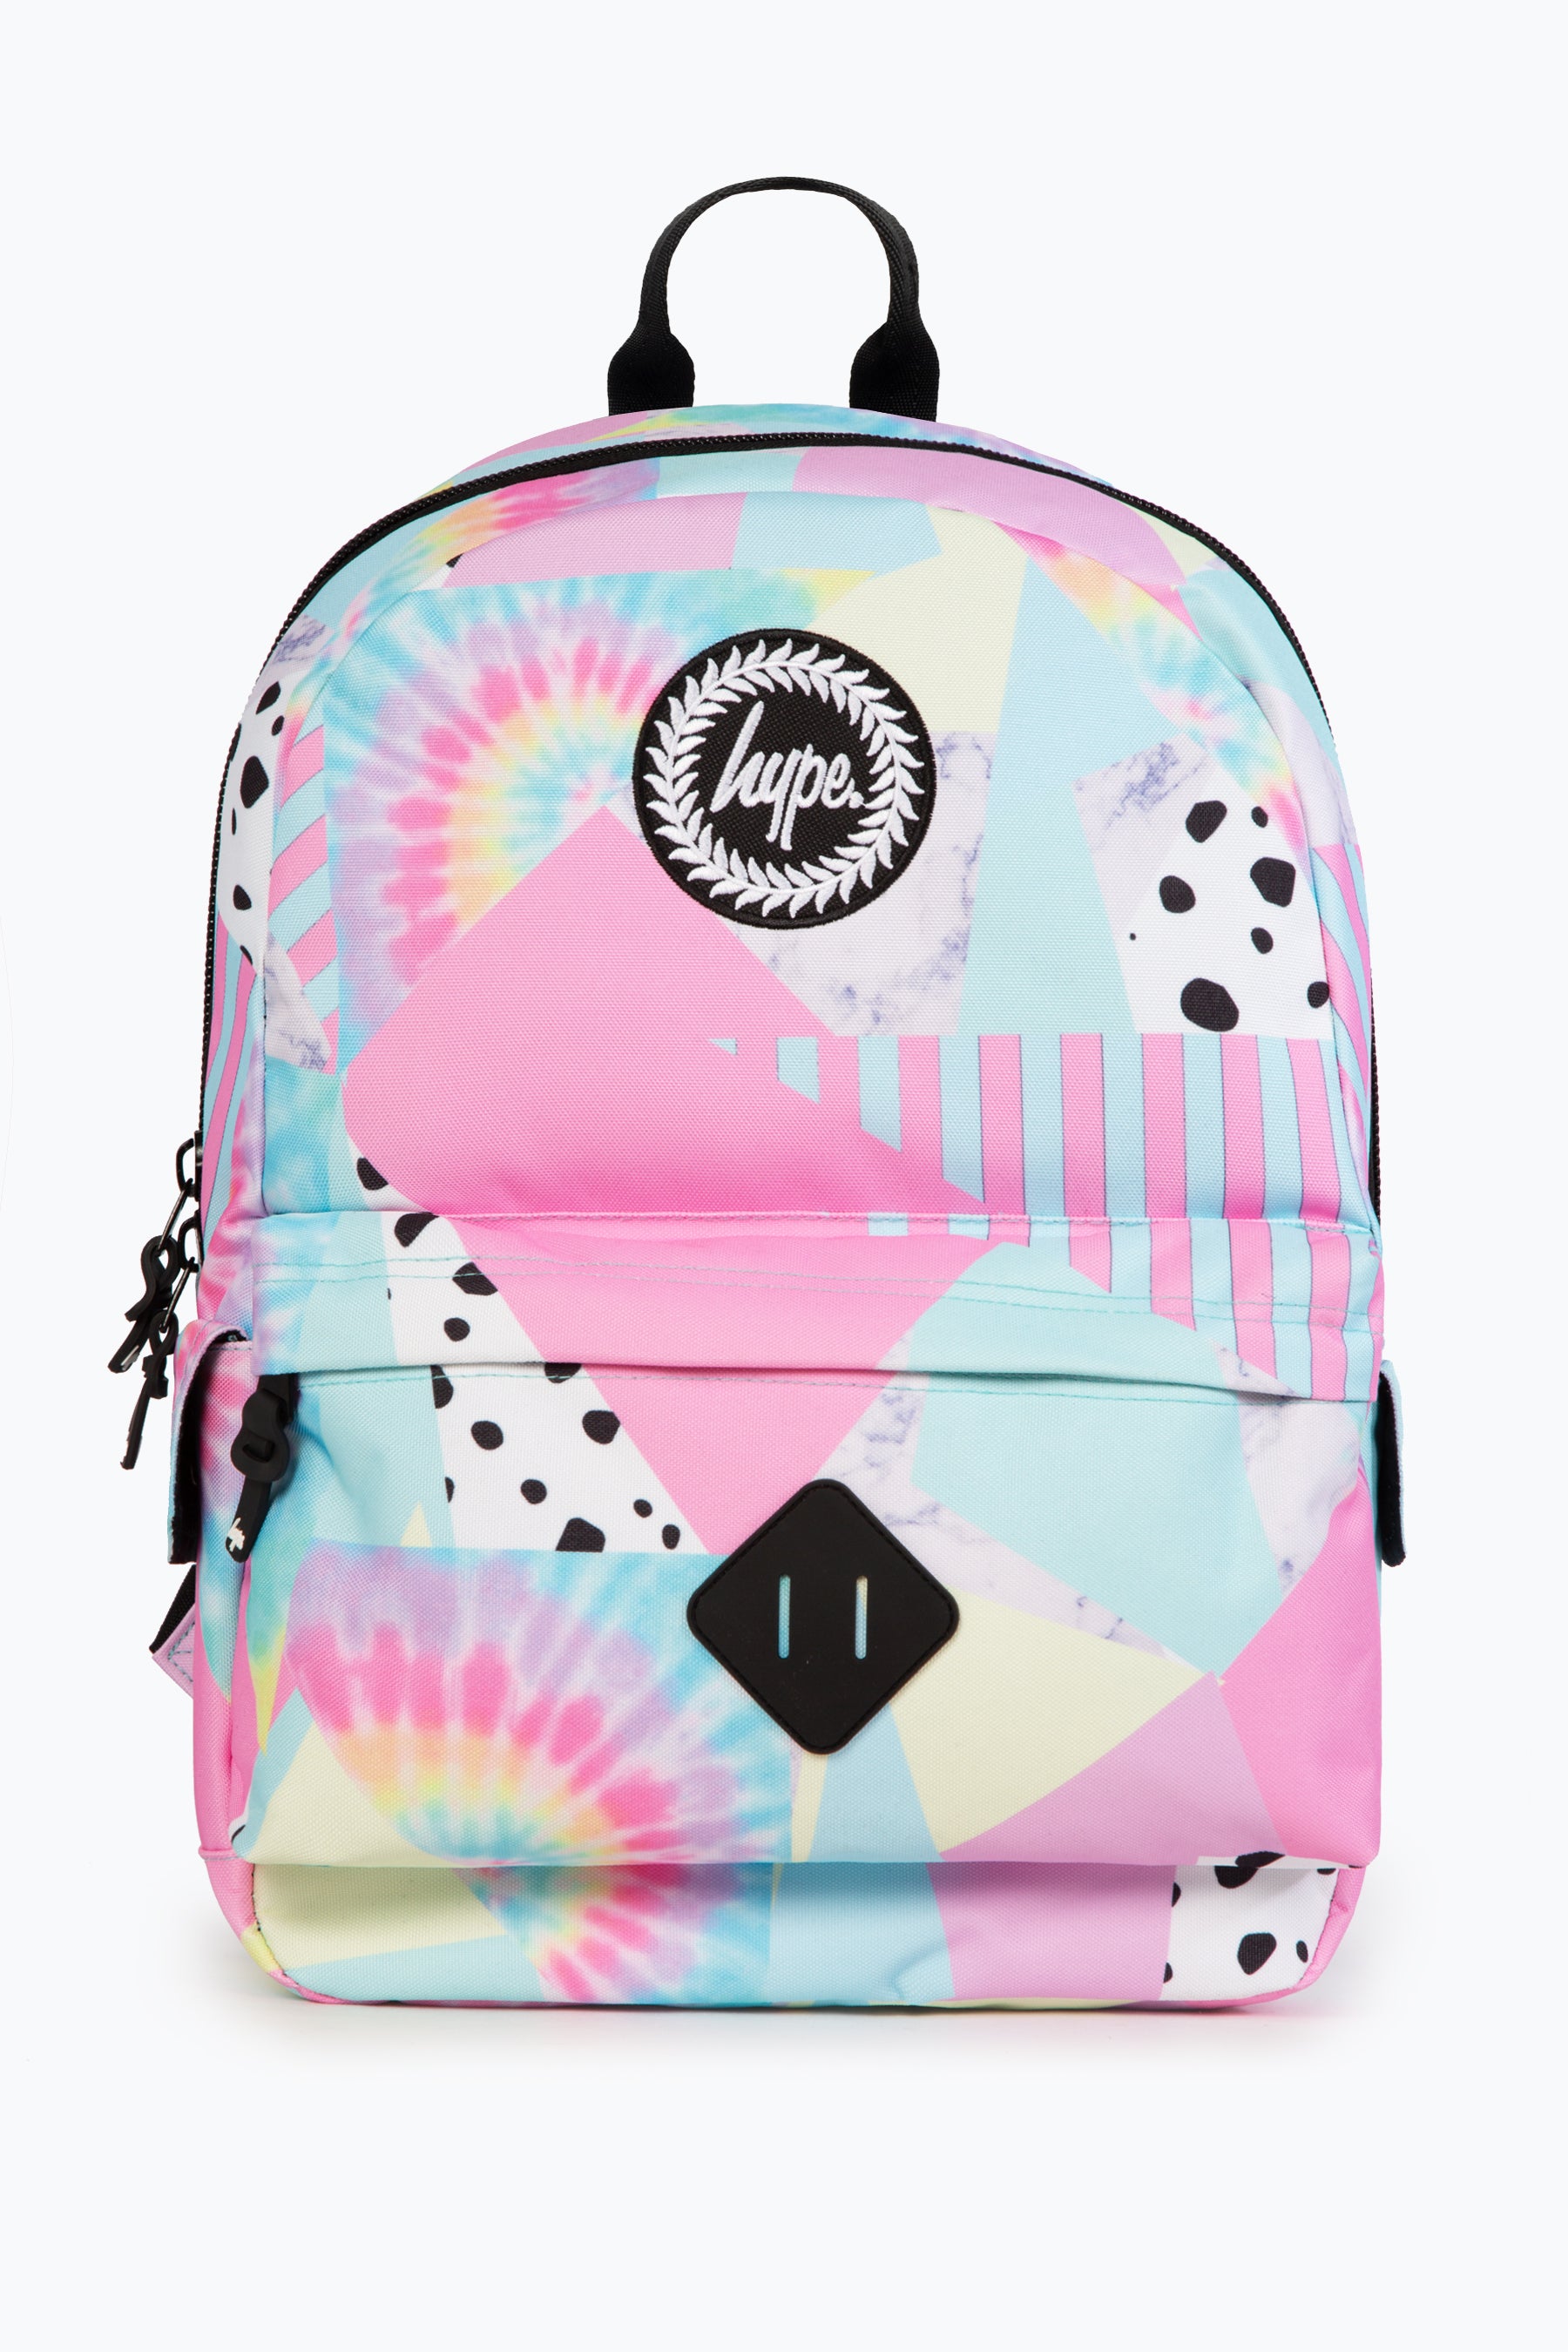 HYPE PASTEL COLLAGE MIDI BACKPACK | Hype.